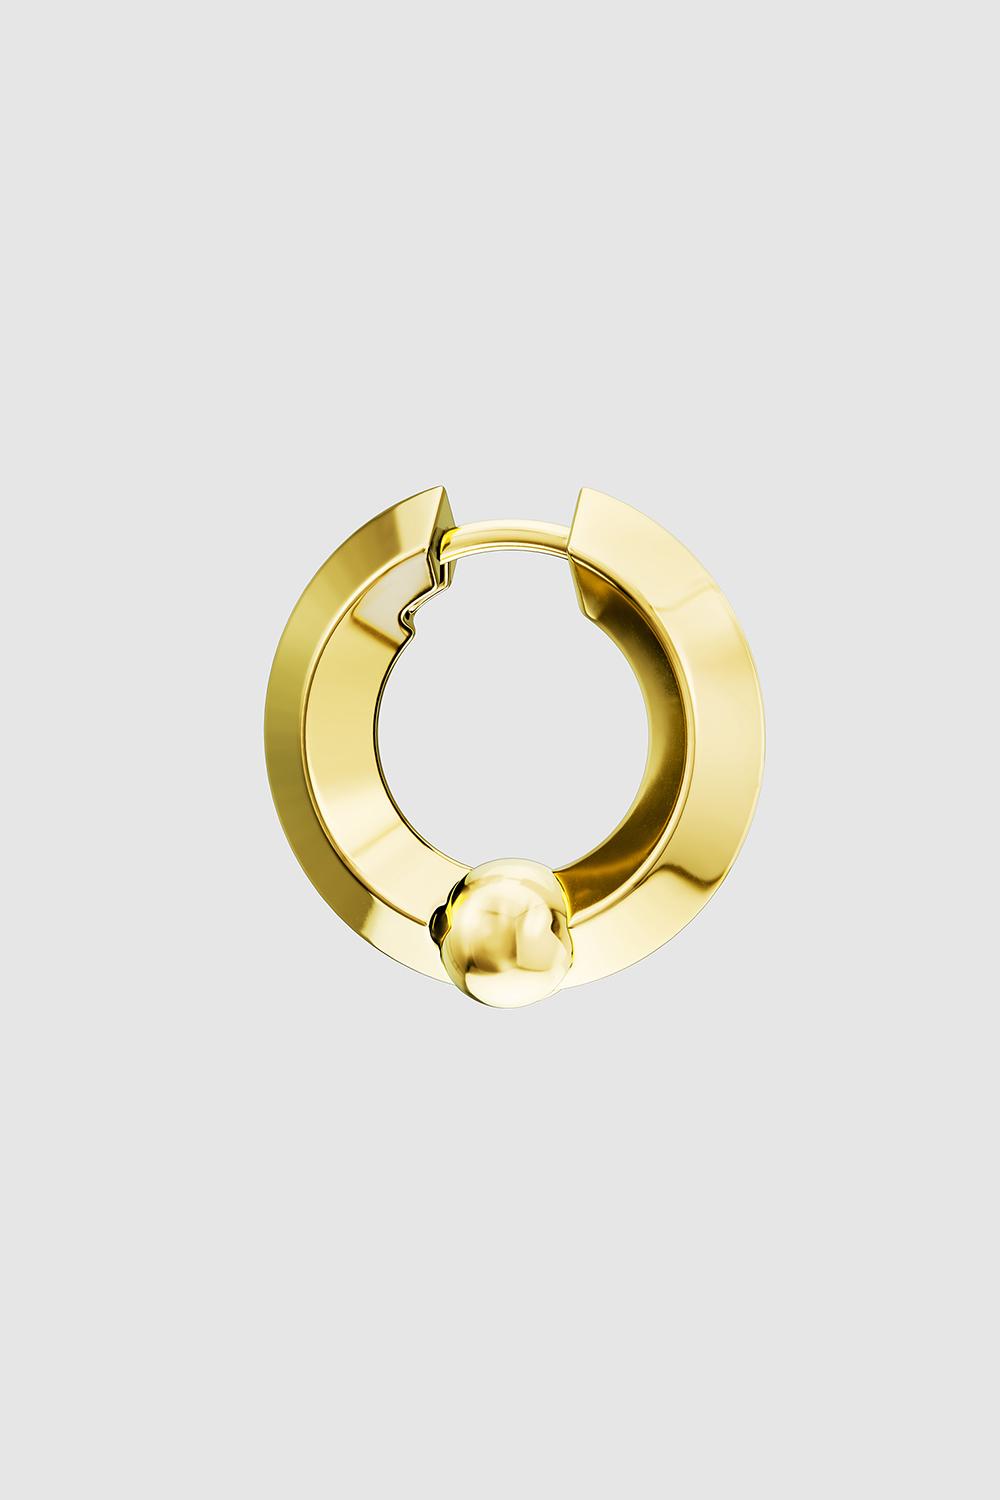 Large Ball Joint Hoop Gold Plated